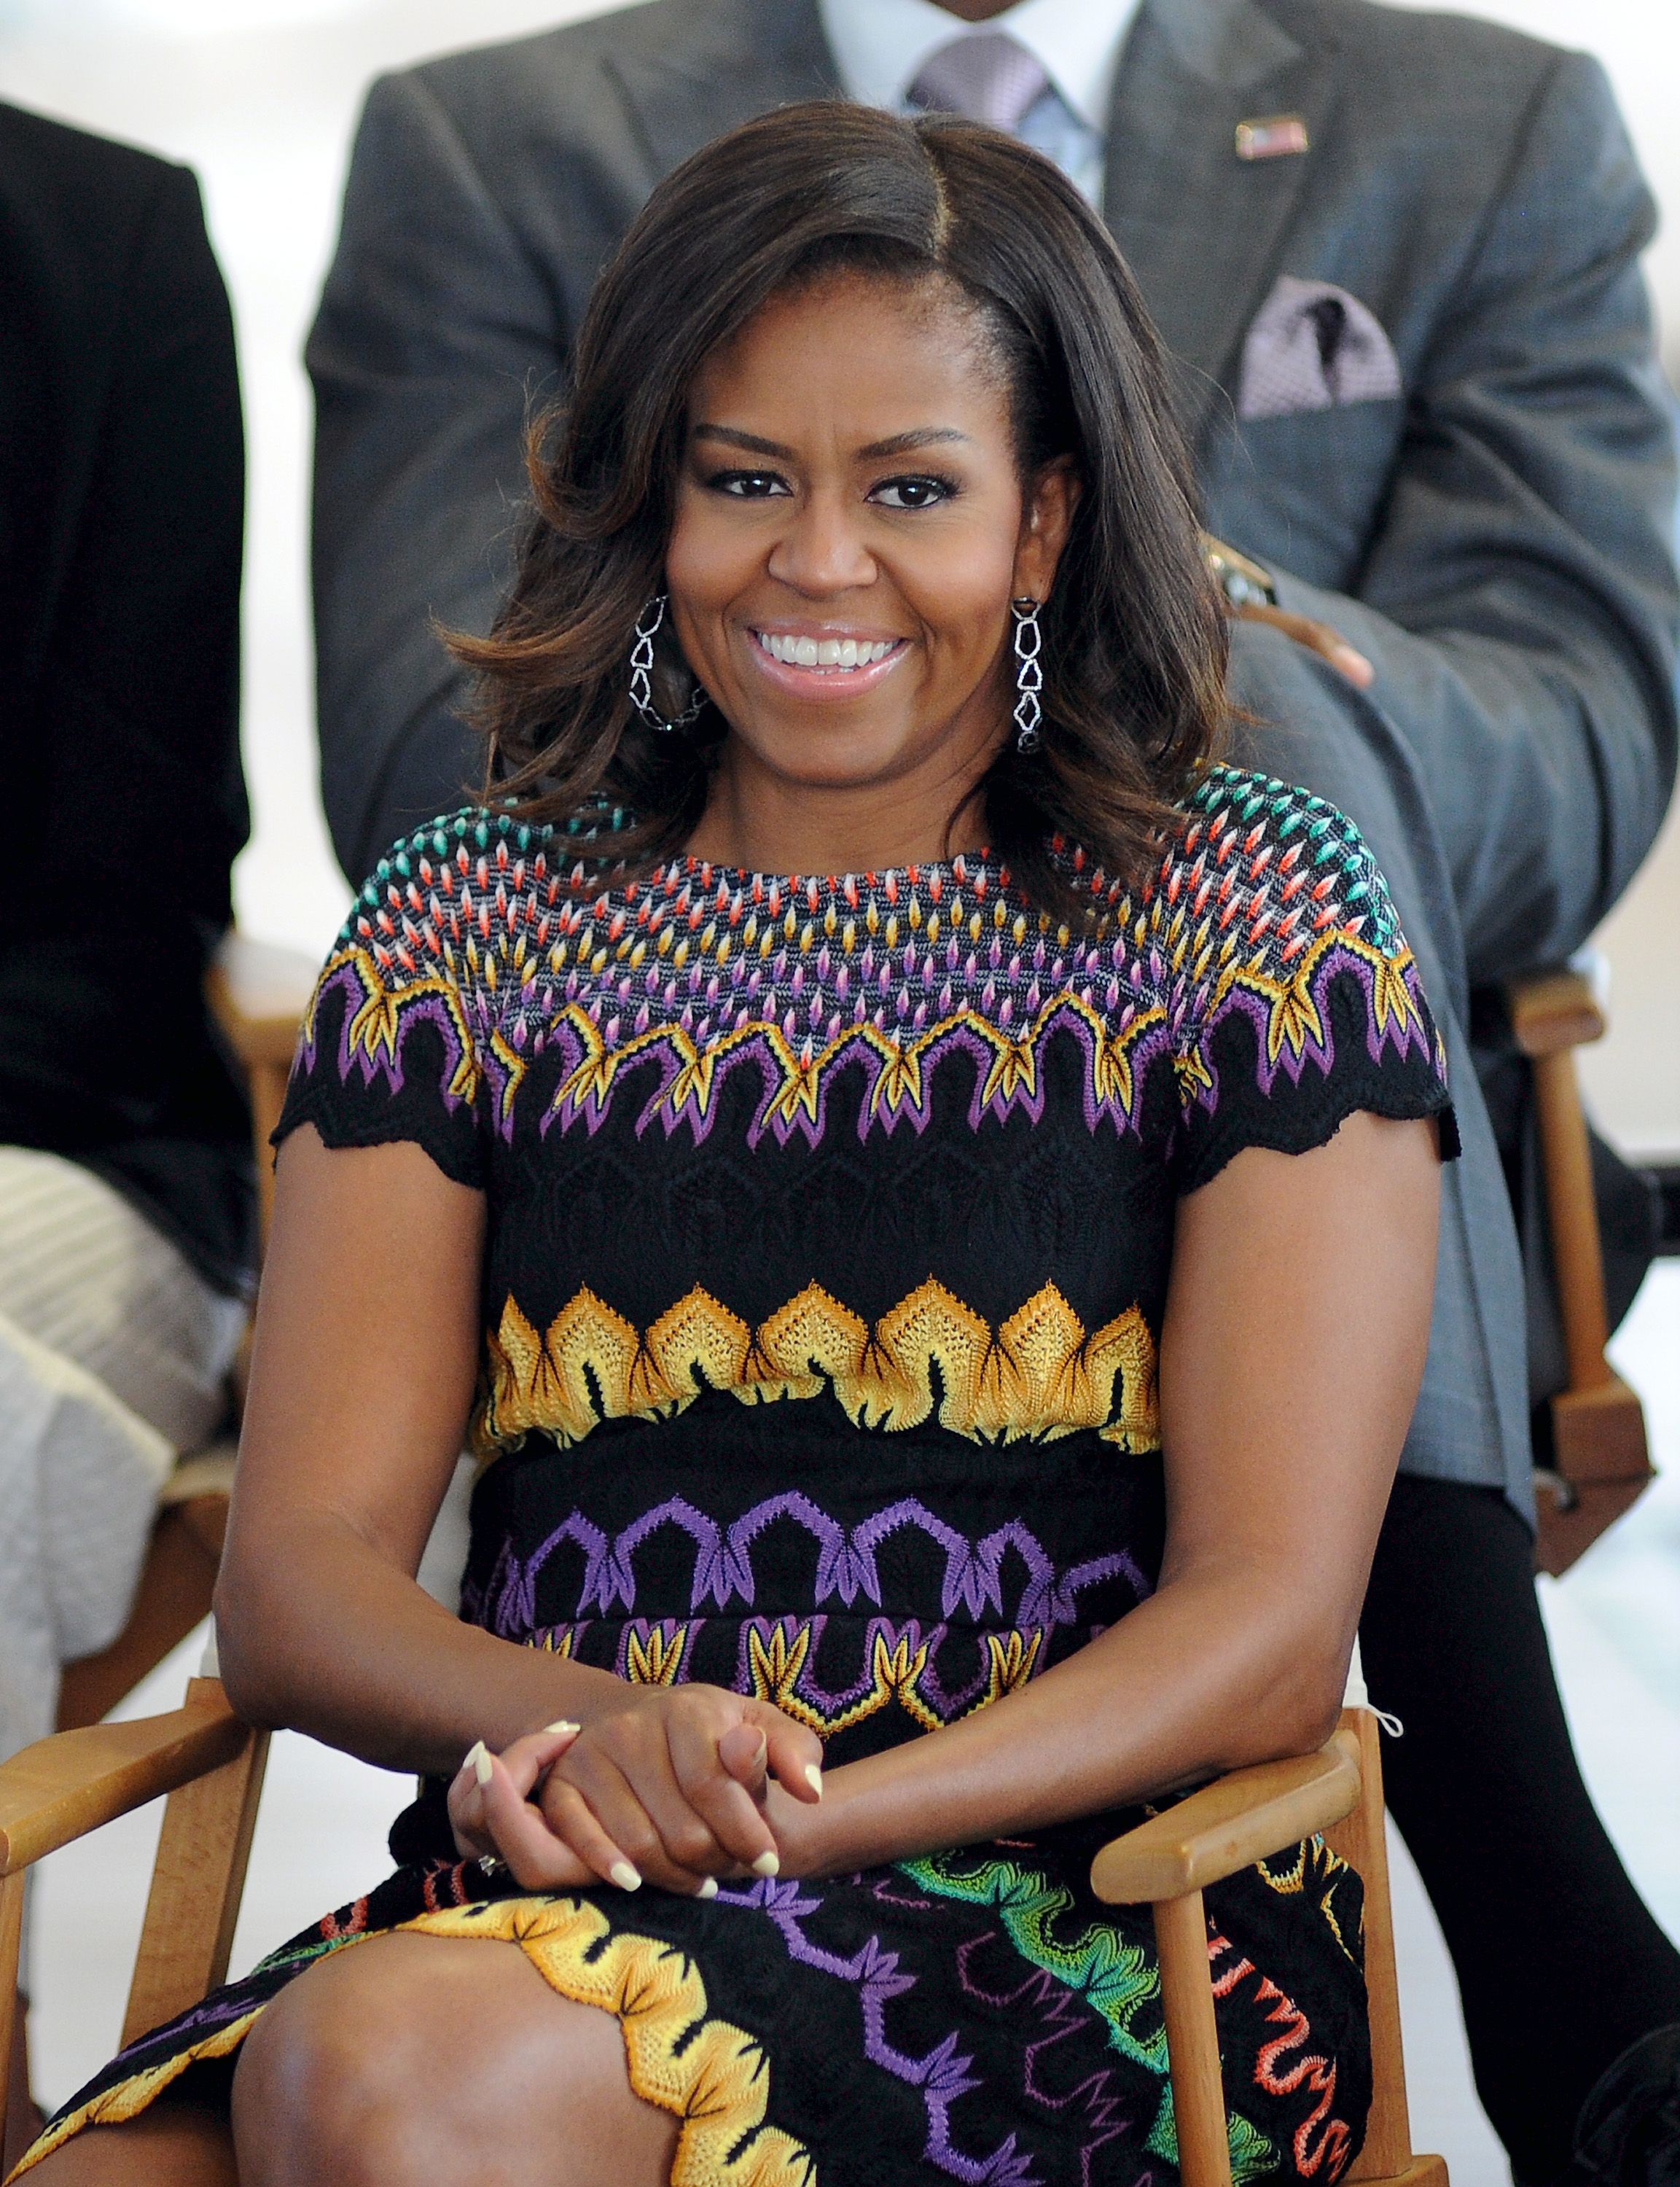 Michelle Obama during question time with 60 American college students at the United States Pavilion at the Milan Expo 2015 on June 18, 2015 in Milan, Italy | Photo: Getty Images 